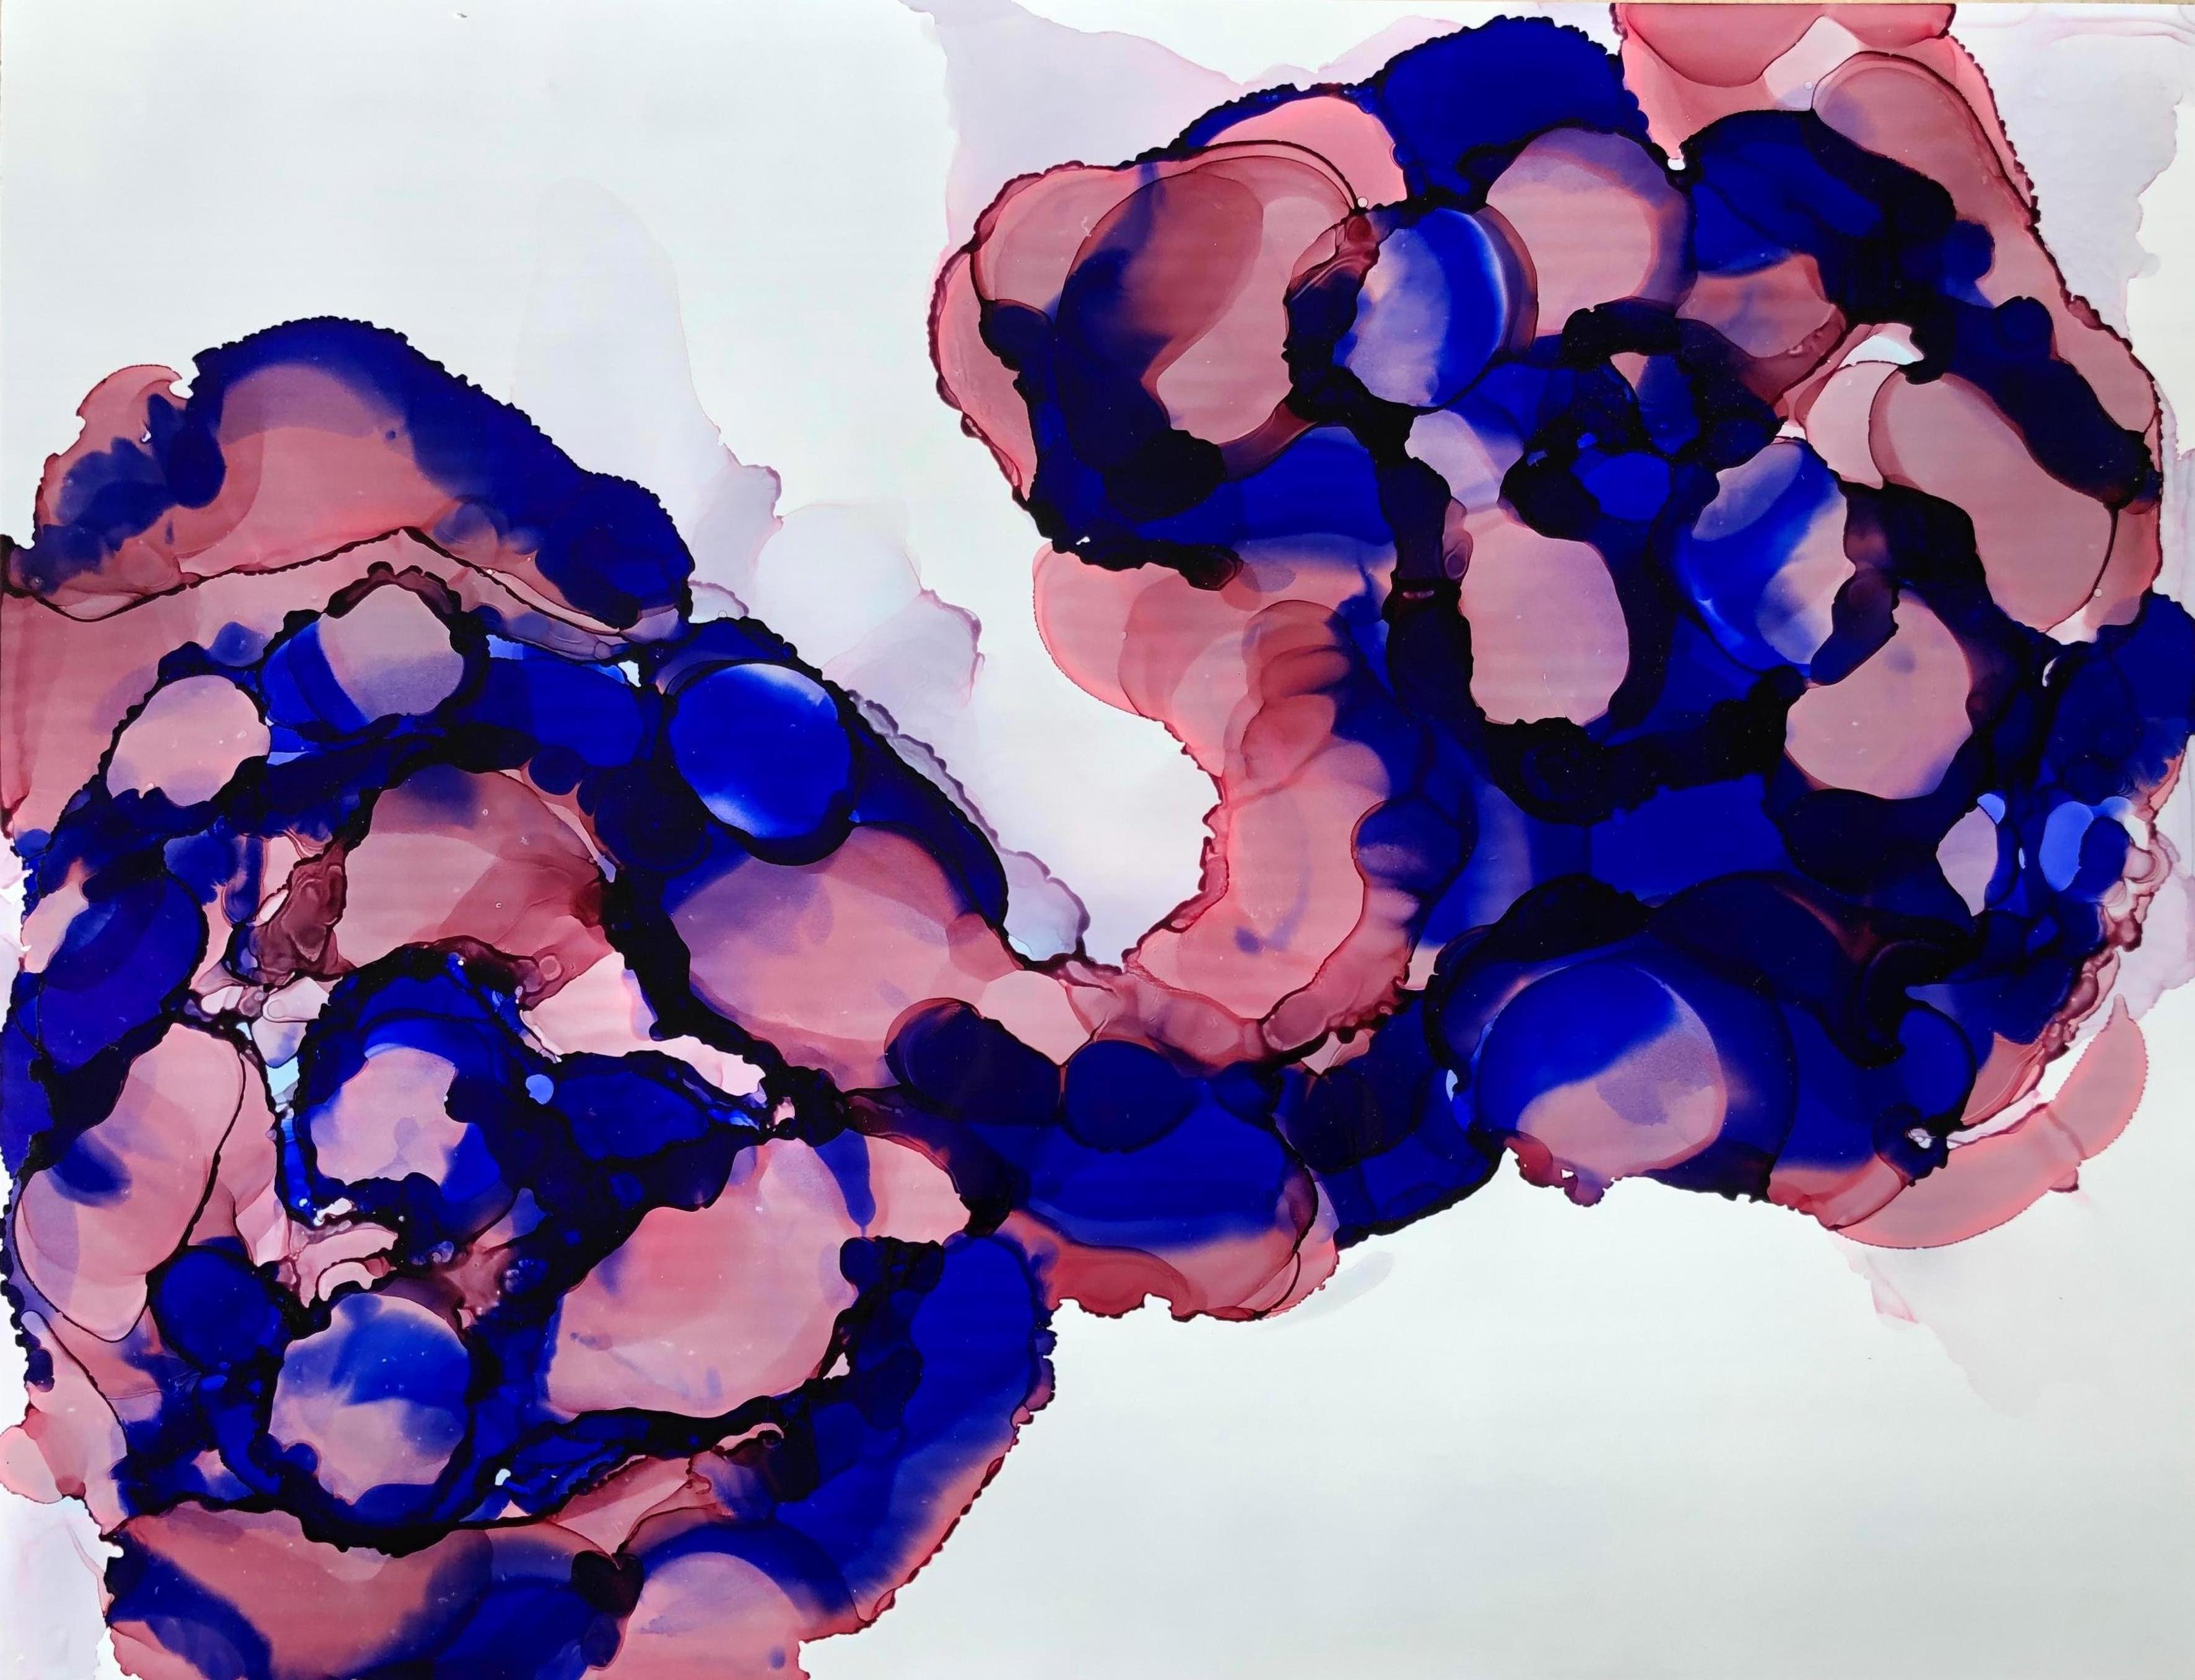 Summer cocktail-abstraction art, made in ultramarine blue, rose, pink color - Abstract Expressionist Art by Mila Akopova